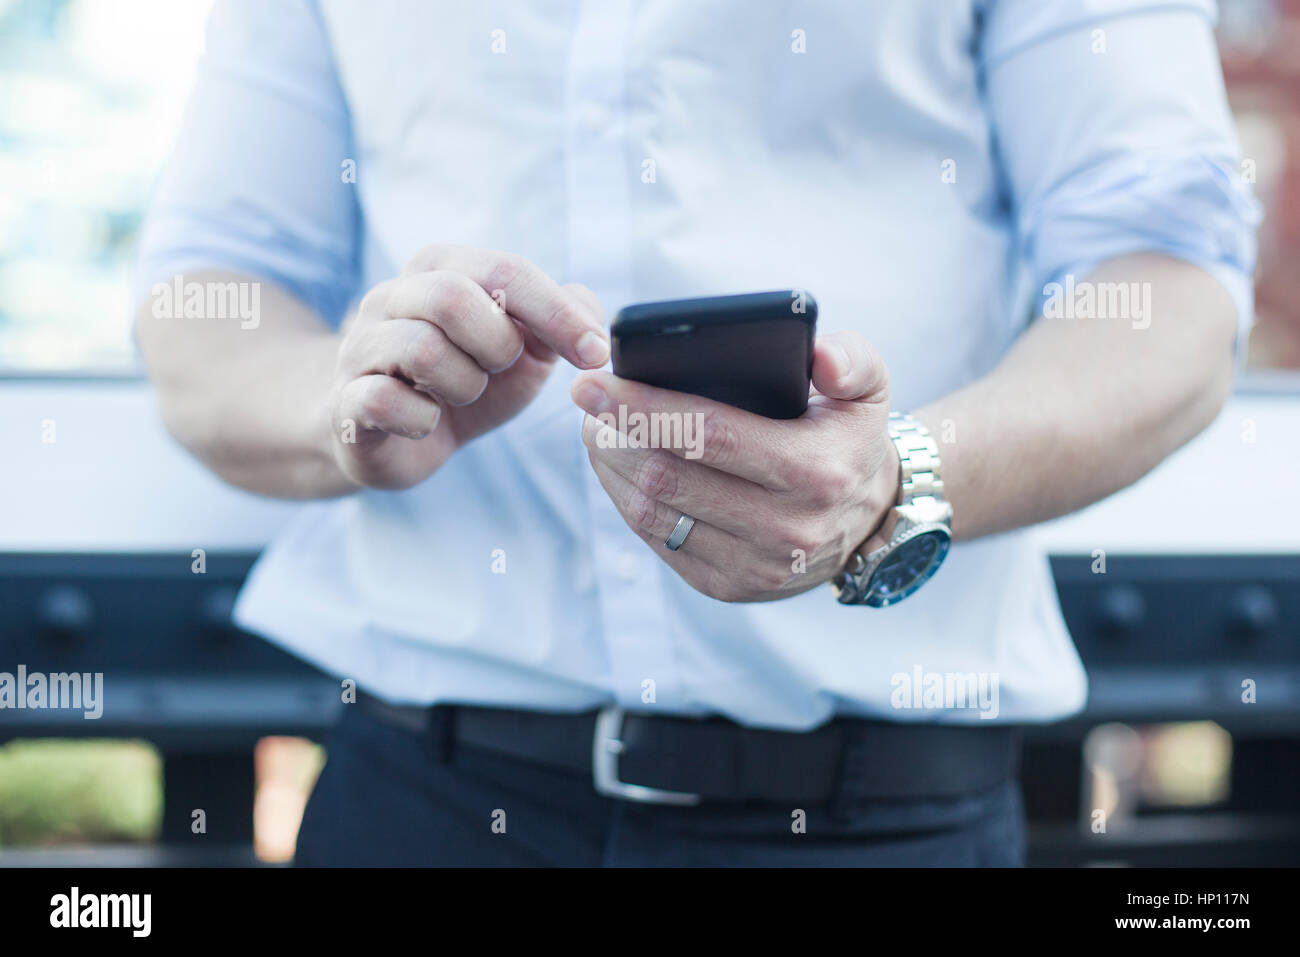 Man using smartphone, mid section Stock Photo